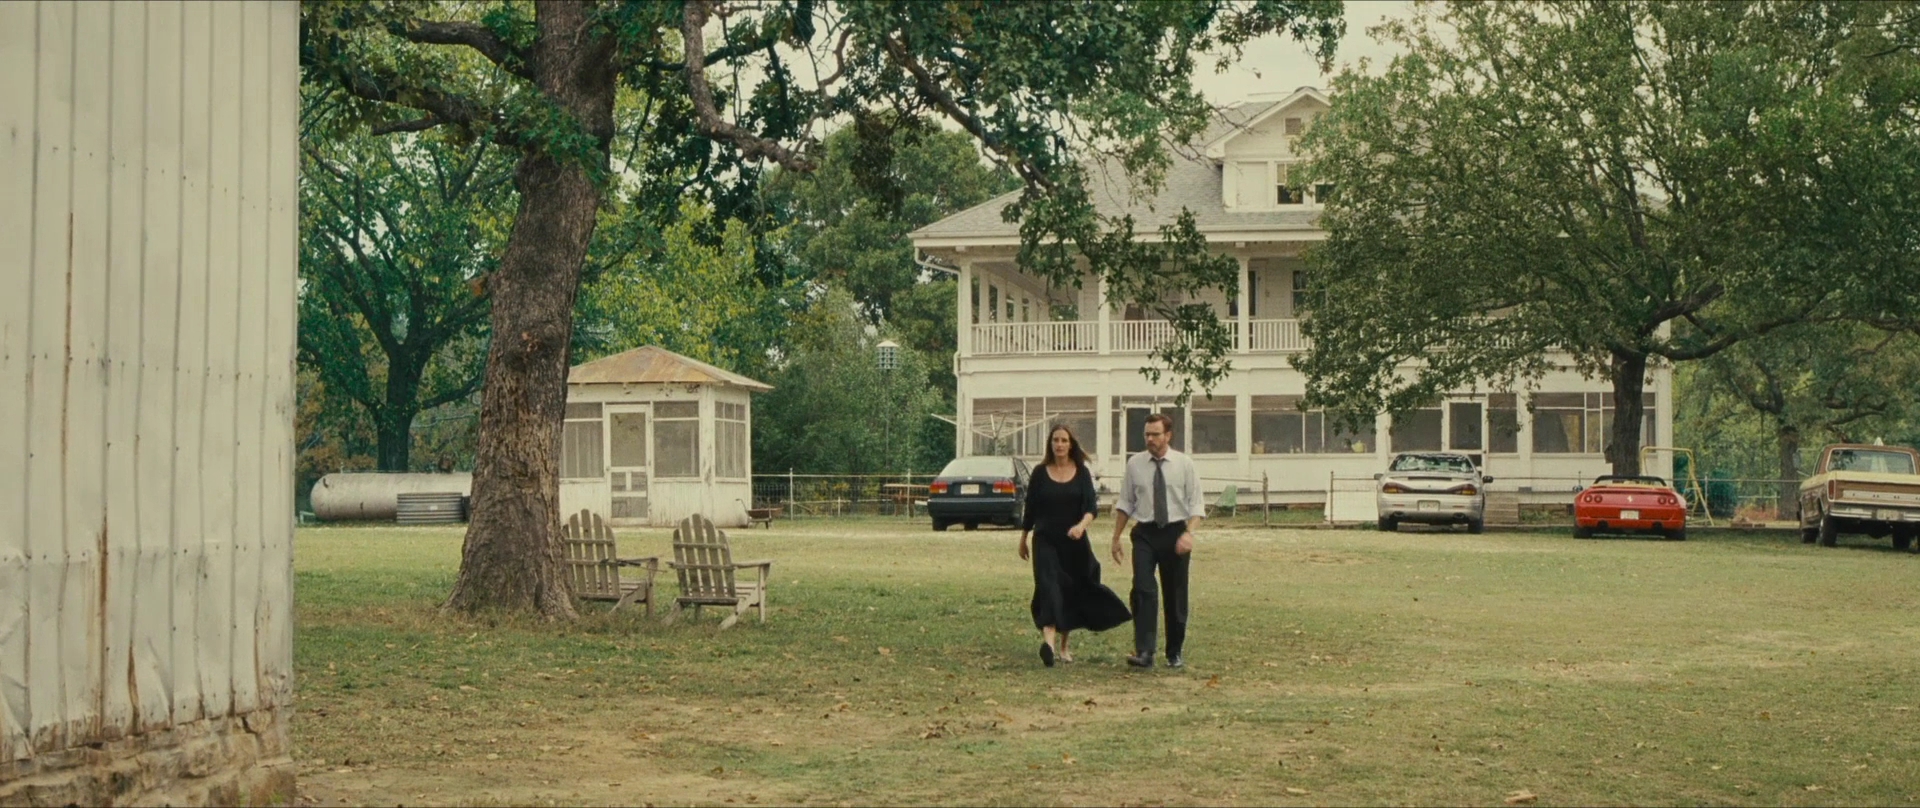 August-Osage-County-152.jpg